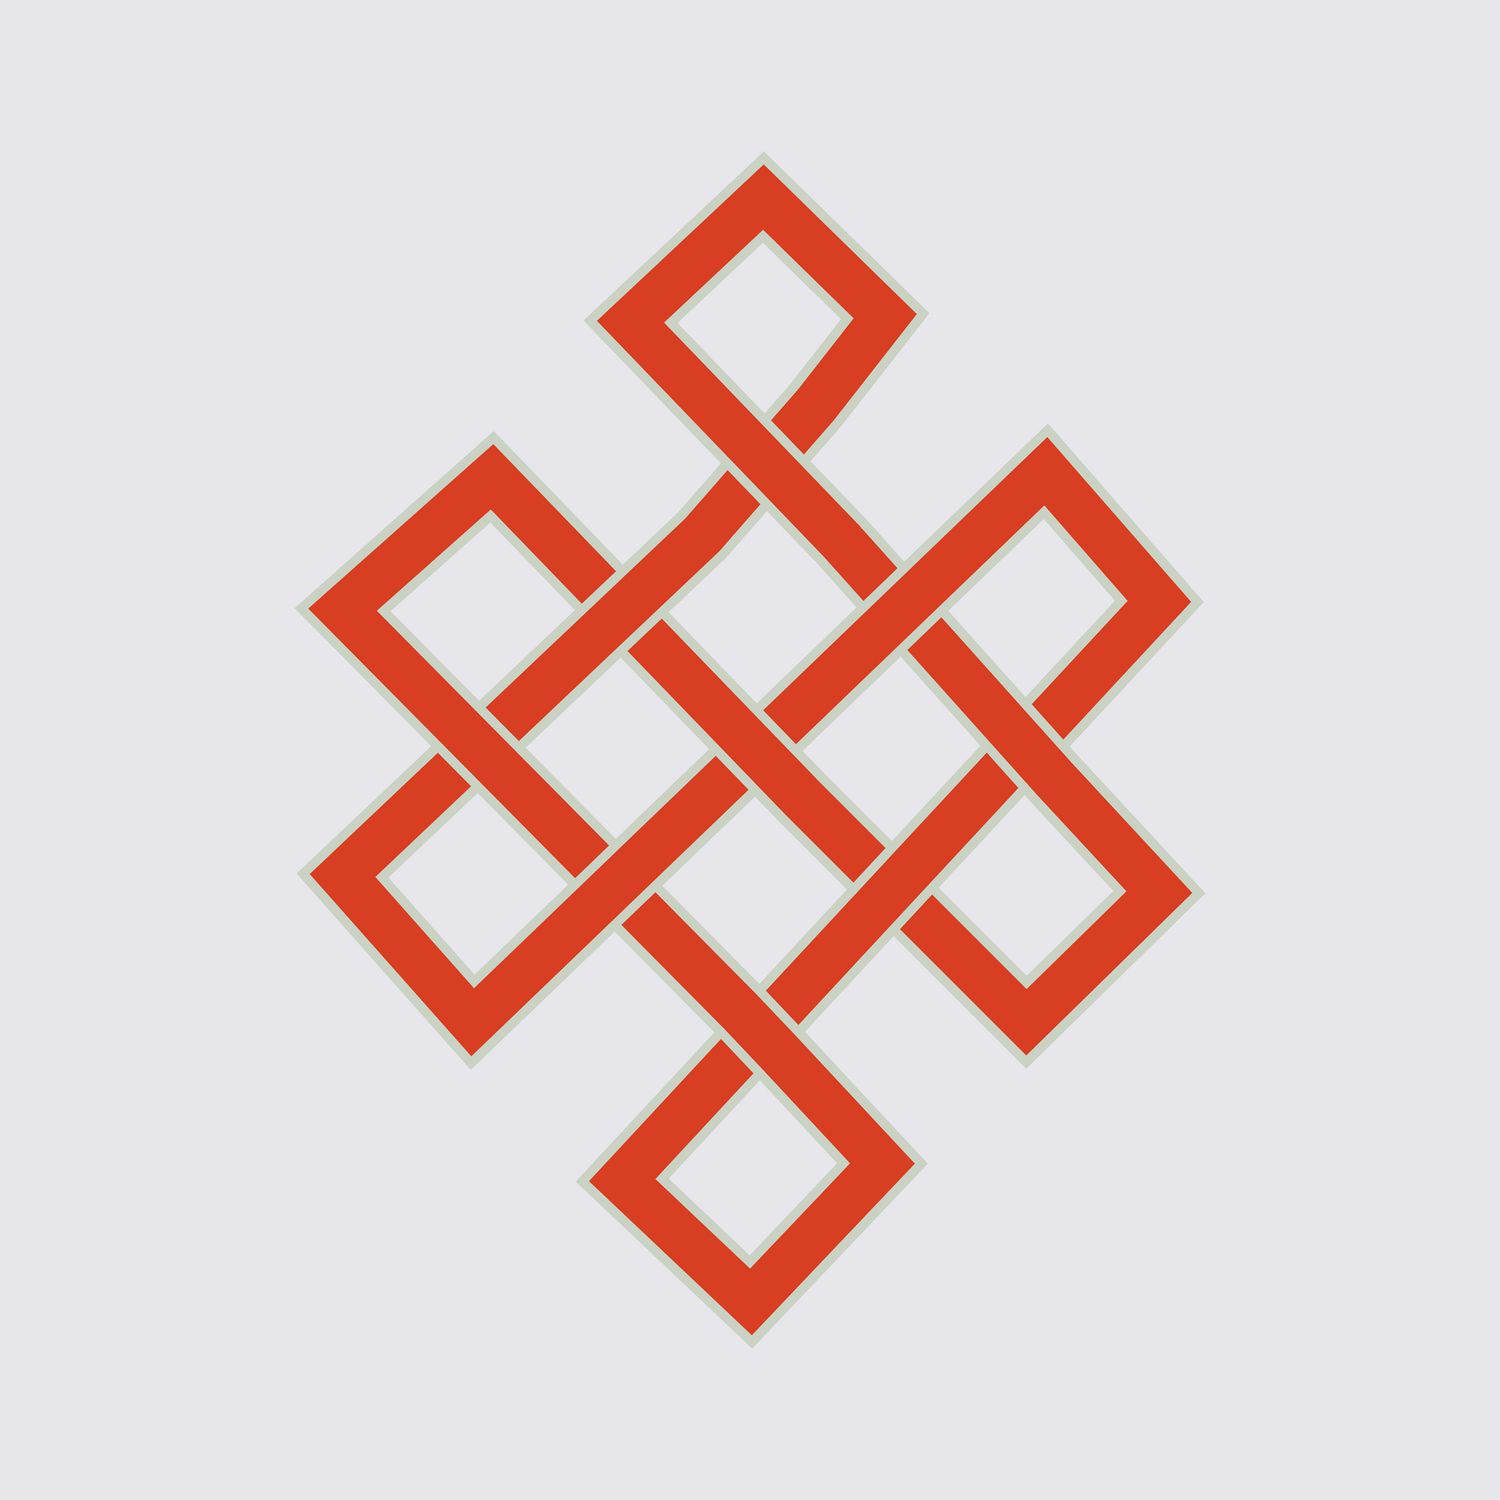 Glorious Eternal Knot or Endless Knot in red